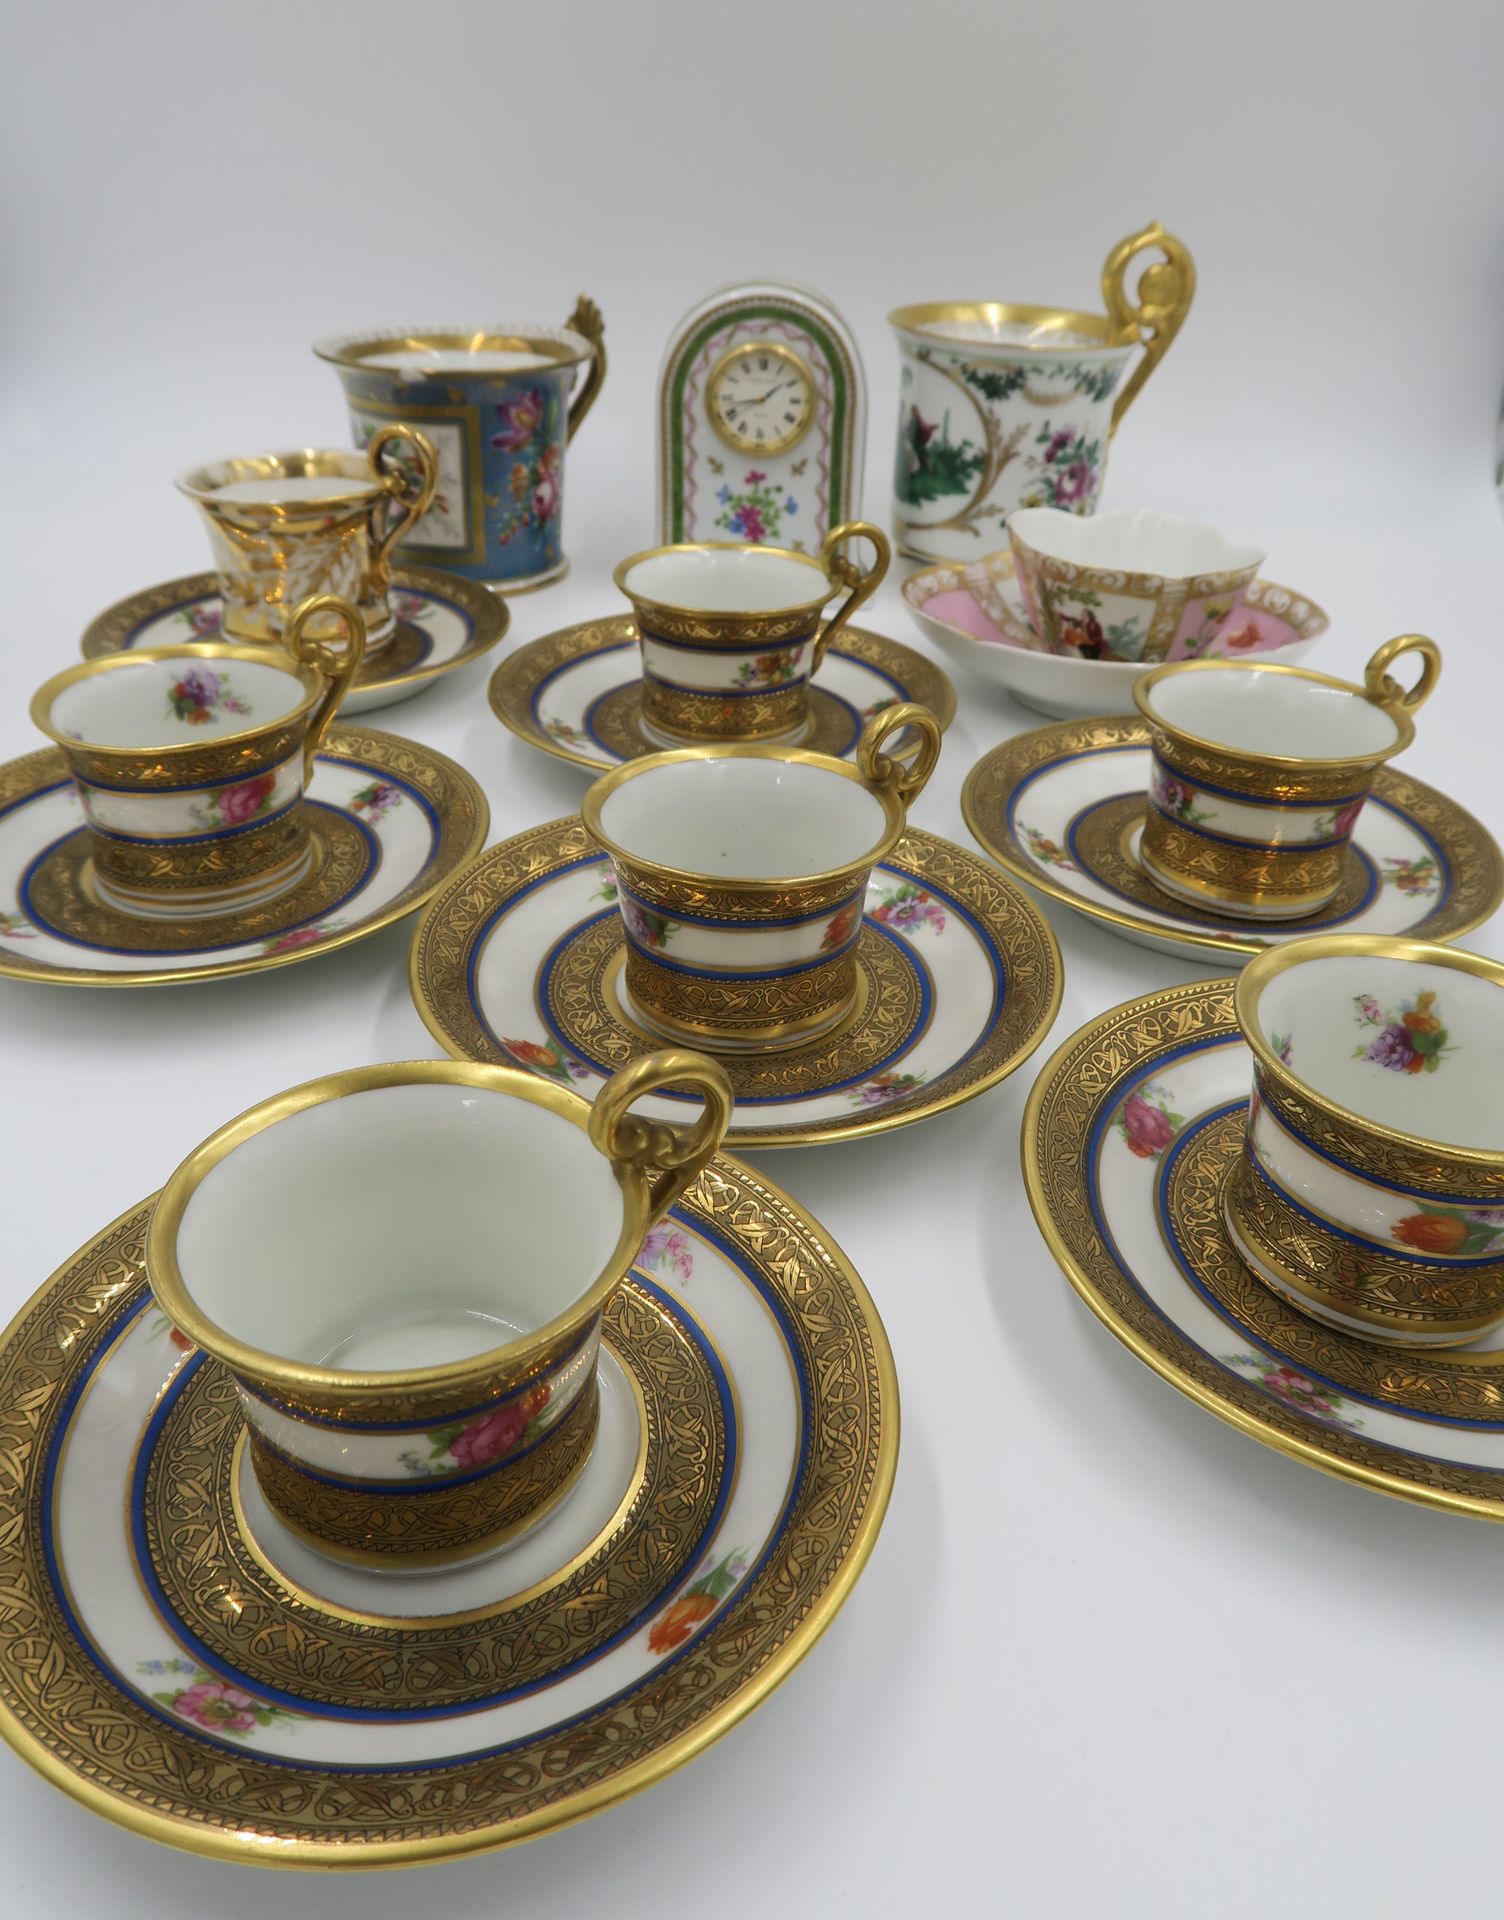 Null Porcelain mocha set, 20th century, with polychrome decoration and gold scro&hellip;